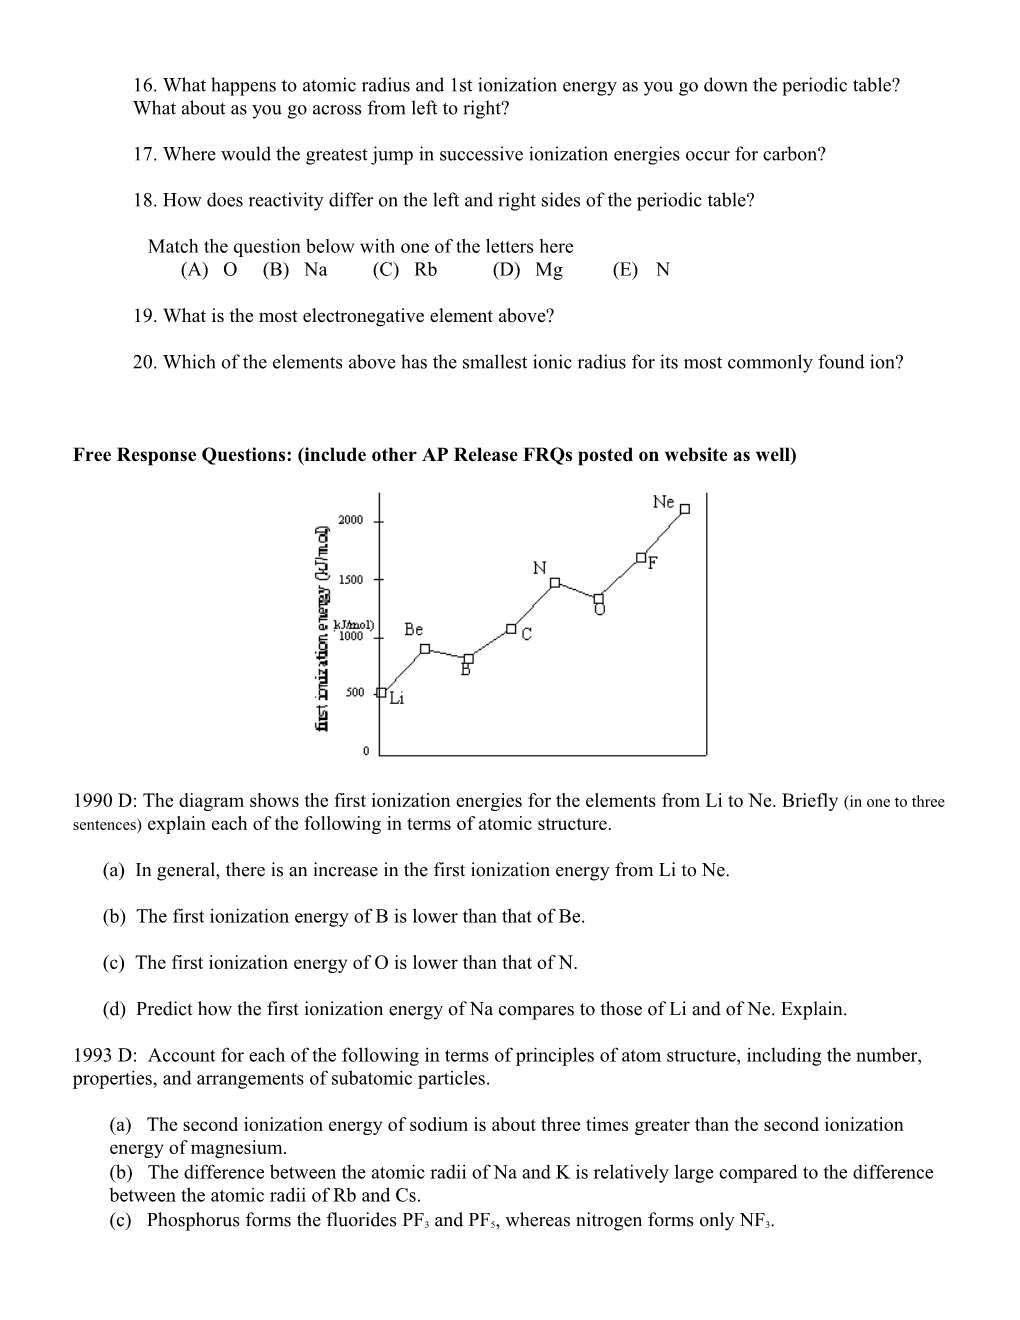 AP Chemistry Study Guide Chapter 6 and 7, Atomic Structure and Periodicity